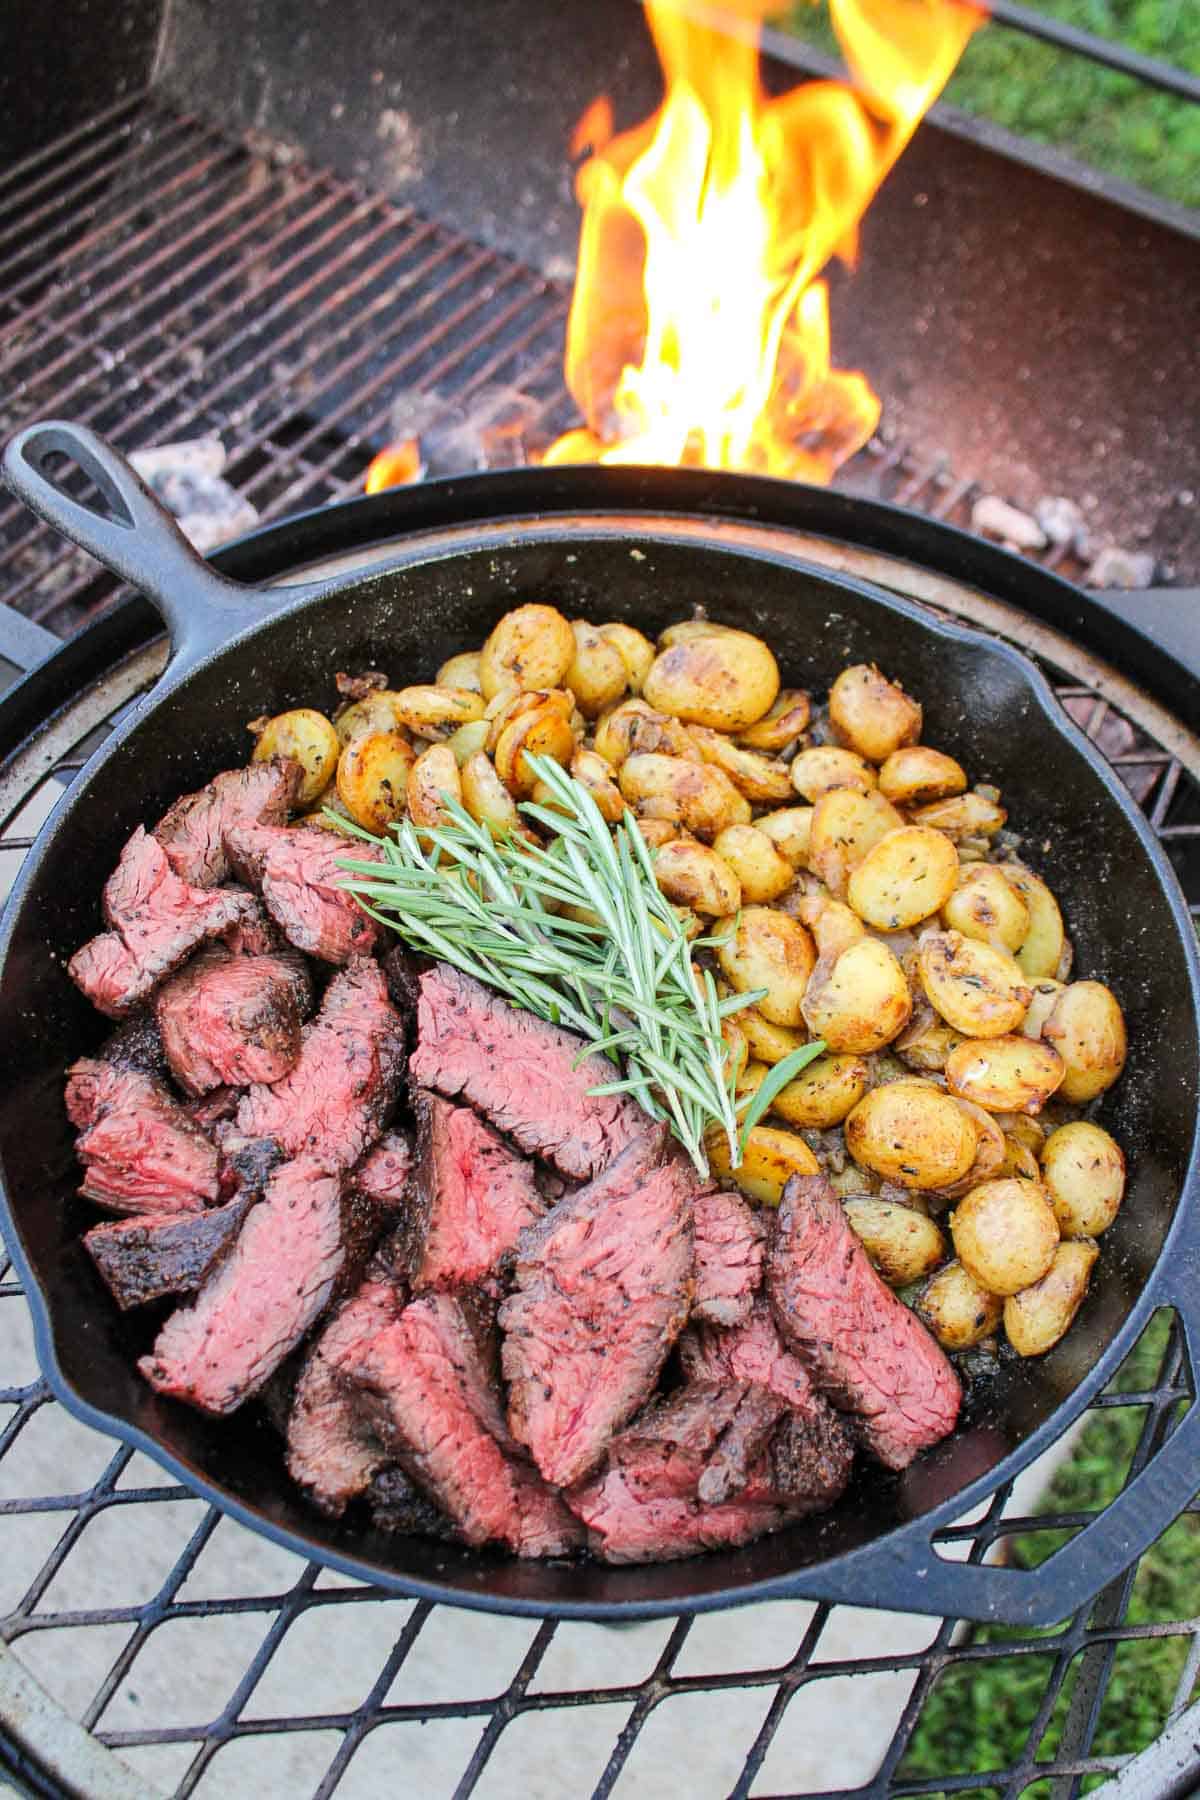 The Grilled Steak with Skillet Potatoes served in a cast iron pan.